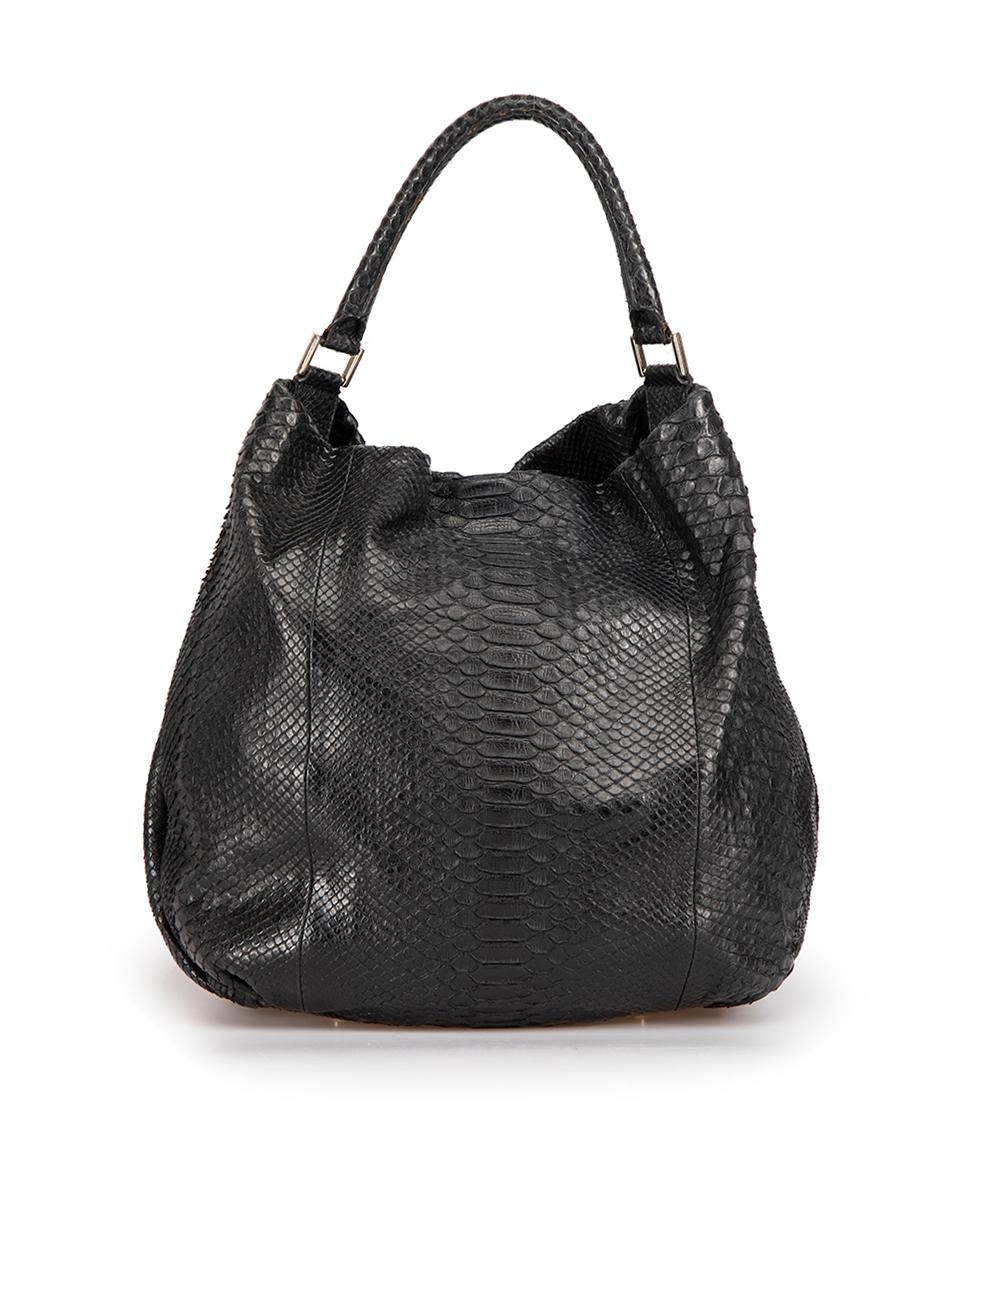 Anya Hindmarch Black Python Leather Tote In Excellent Condition For Sale In London, GB